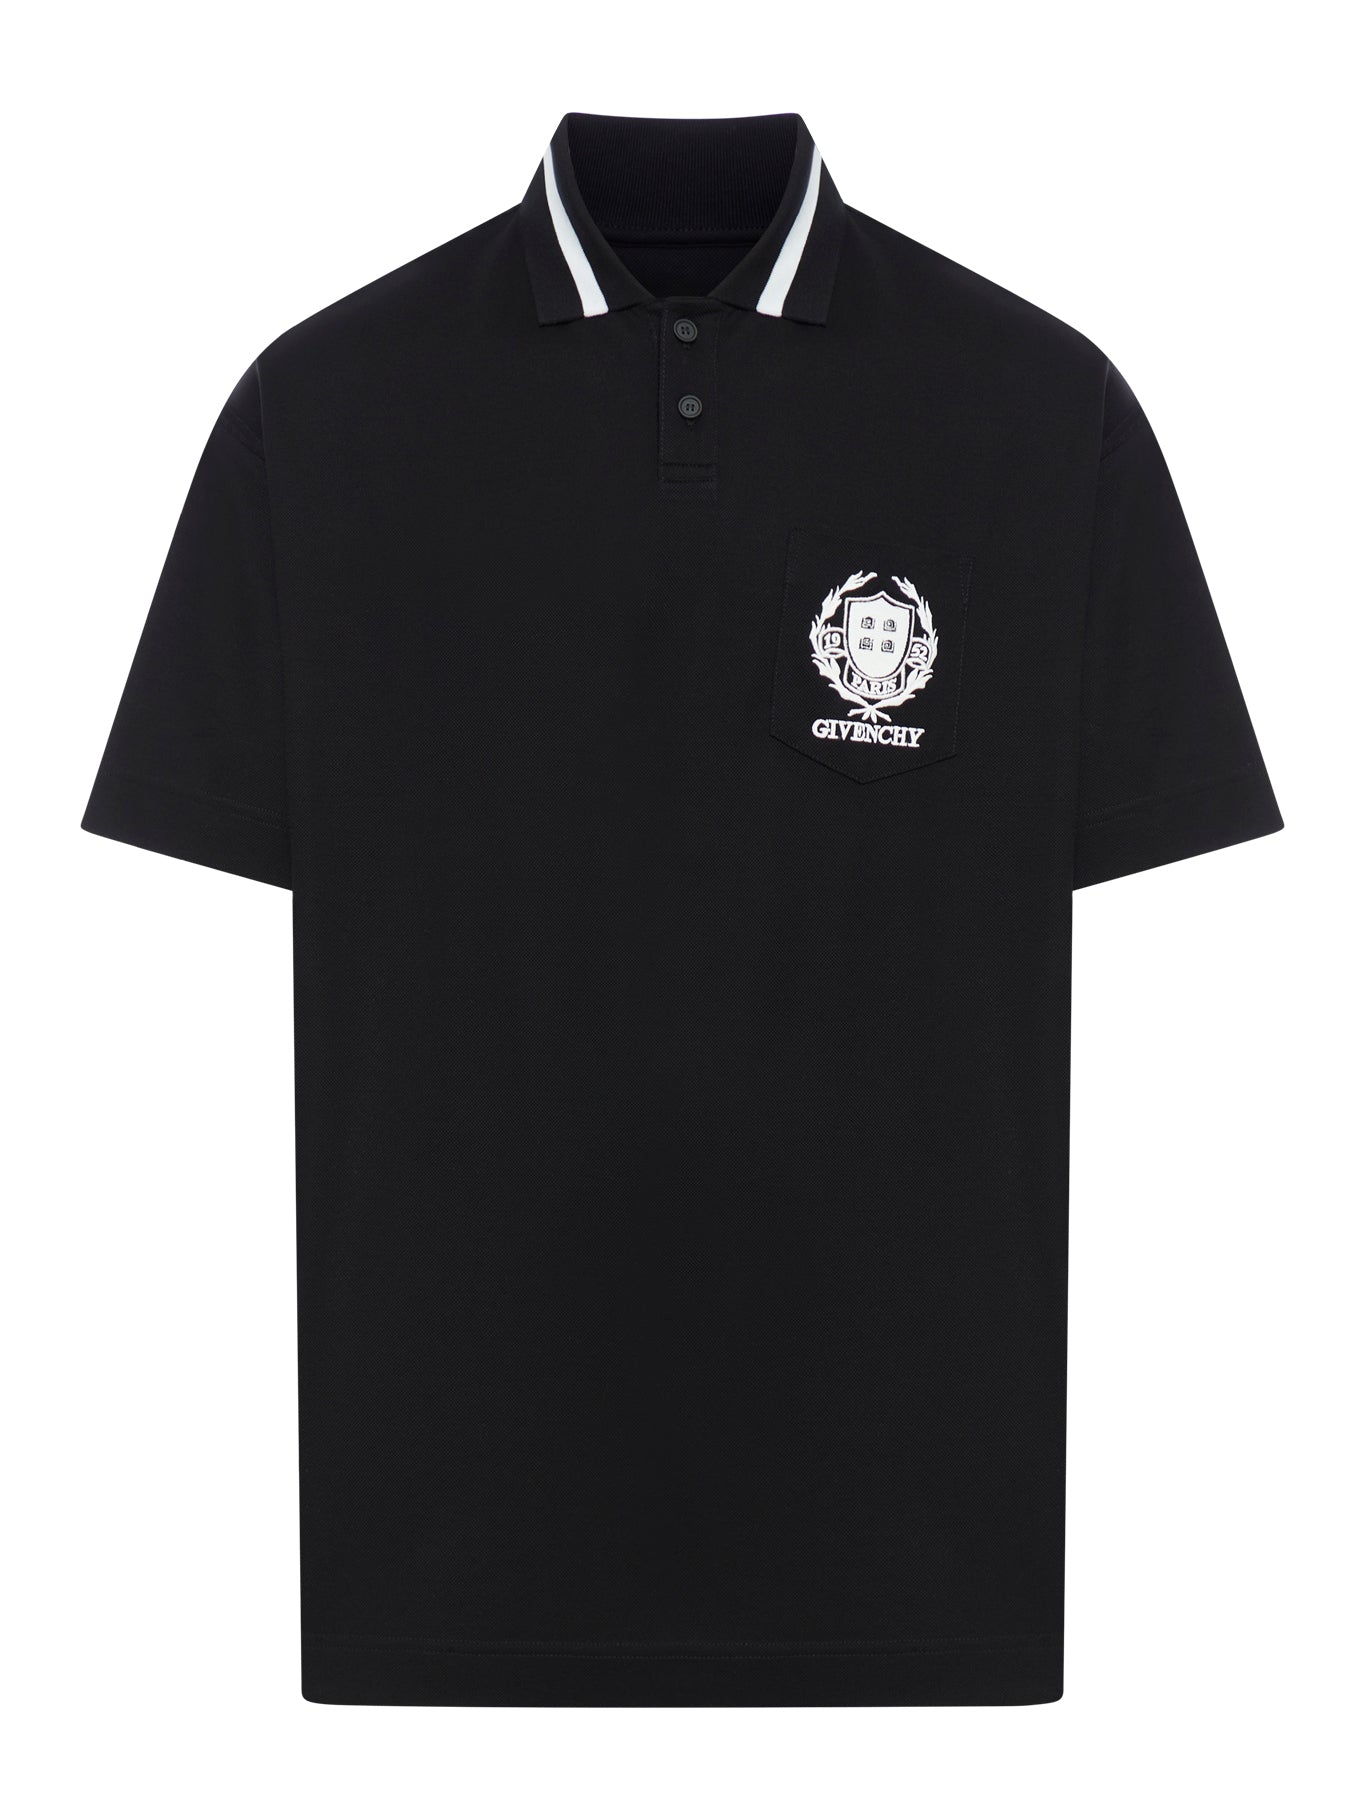 GIVENCHY Crest polo shirt in cotton